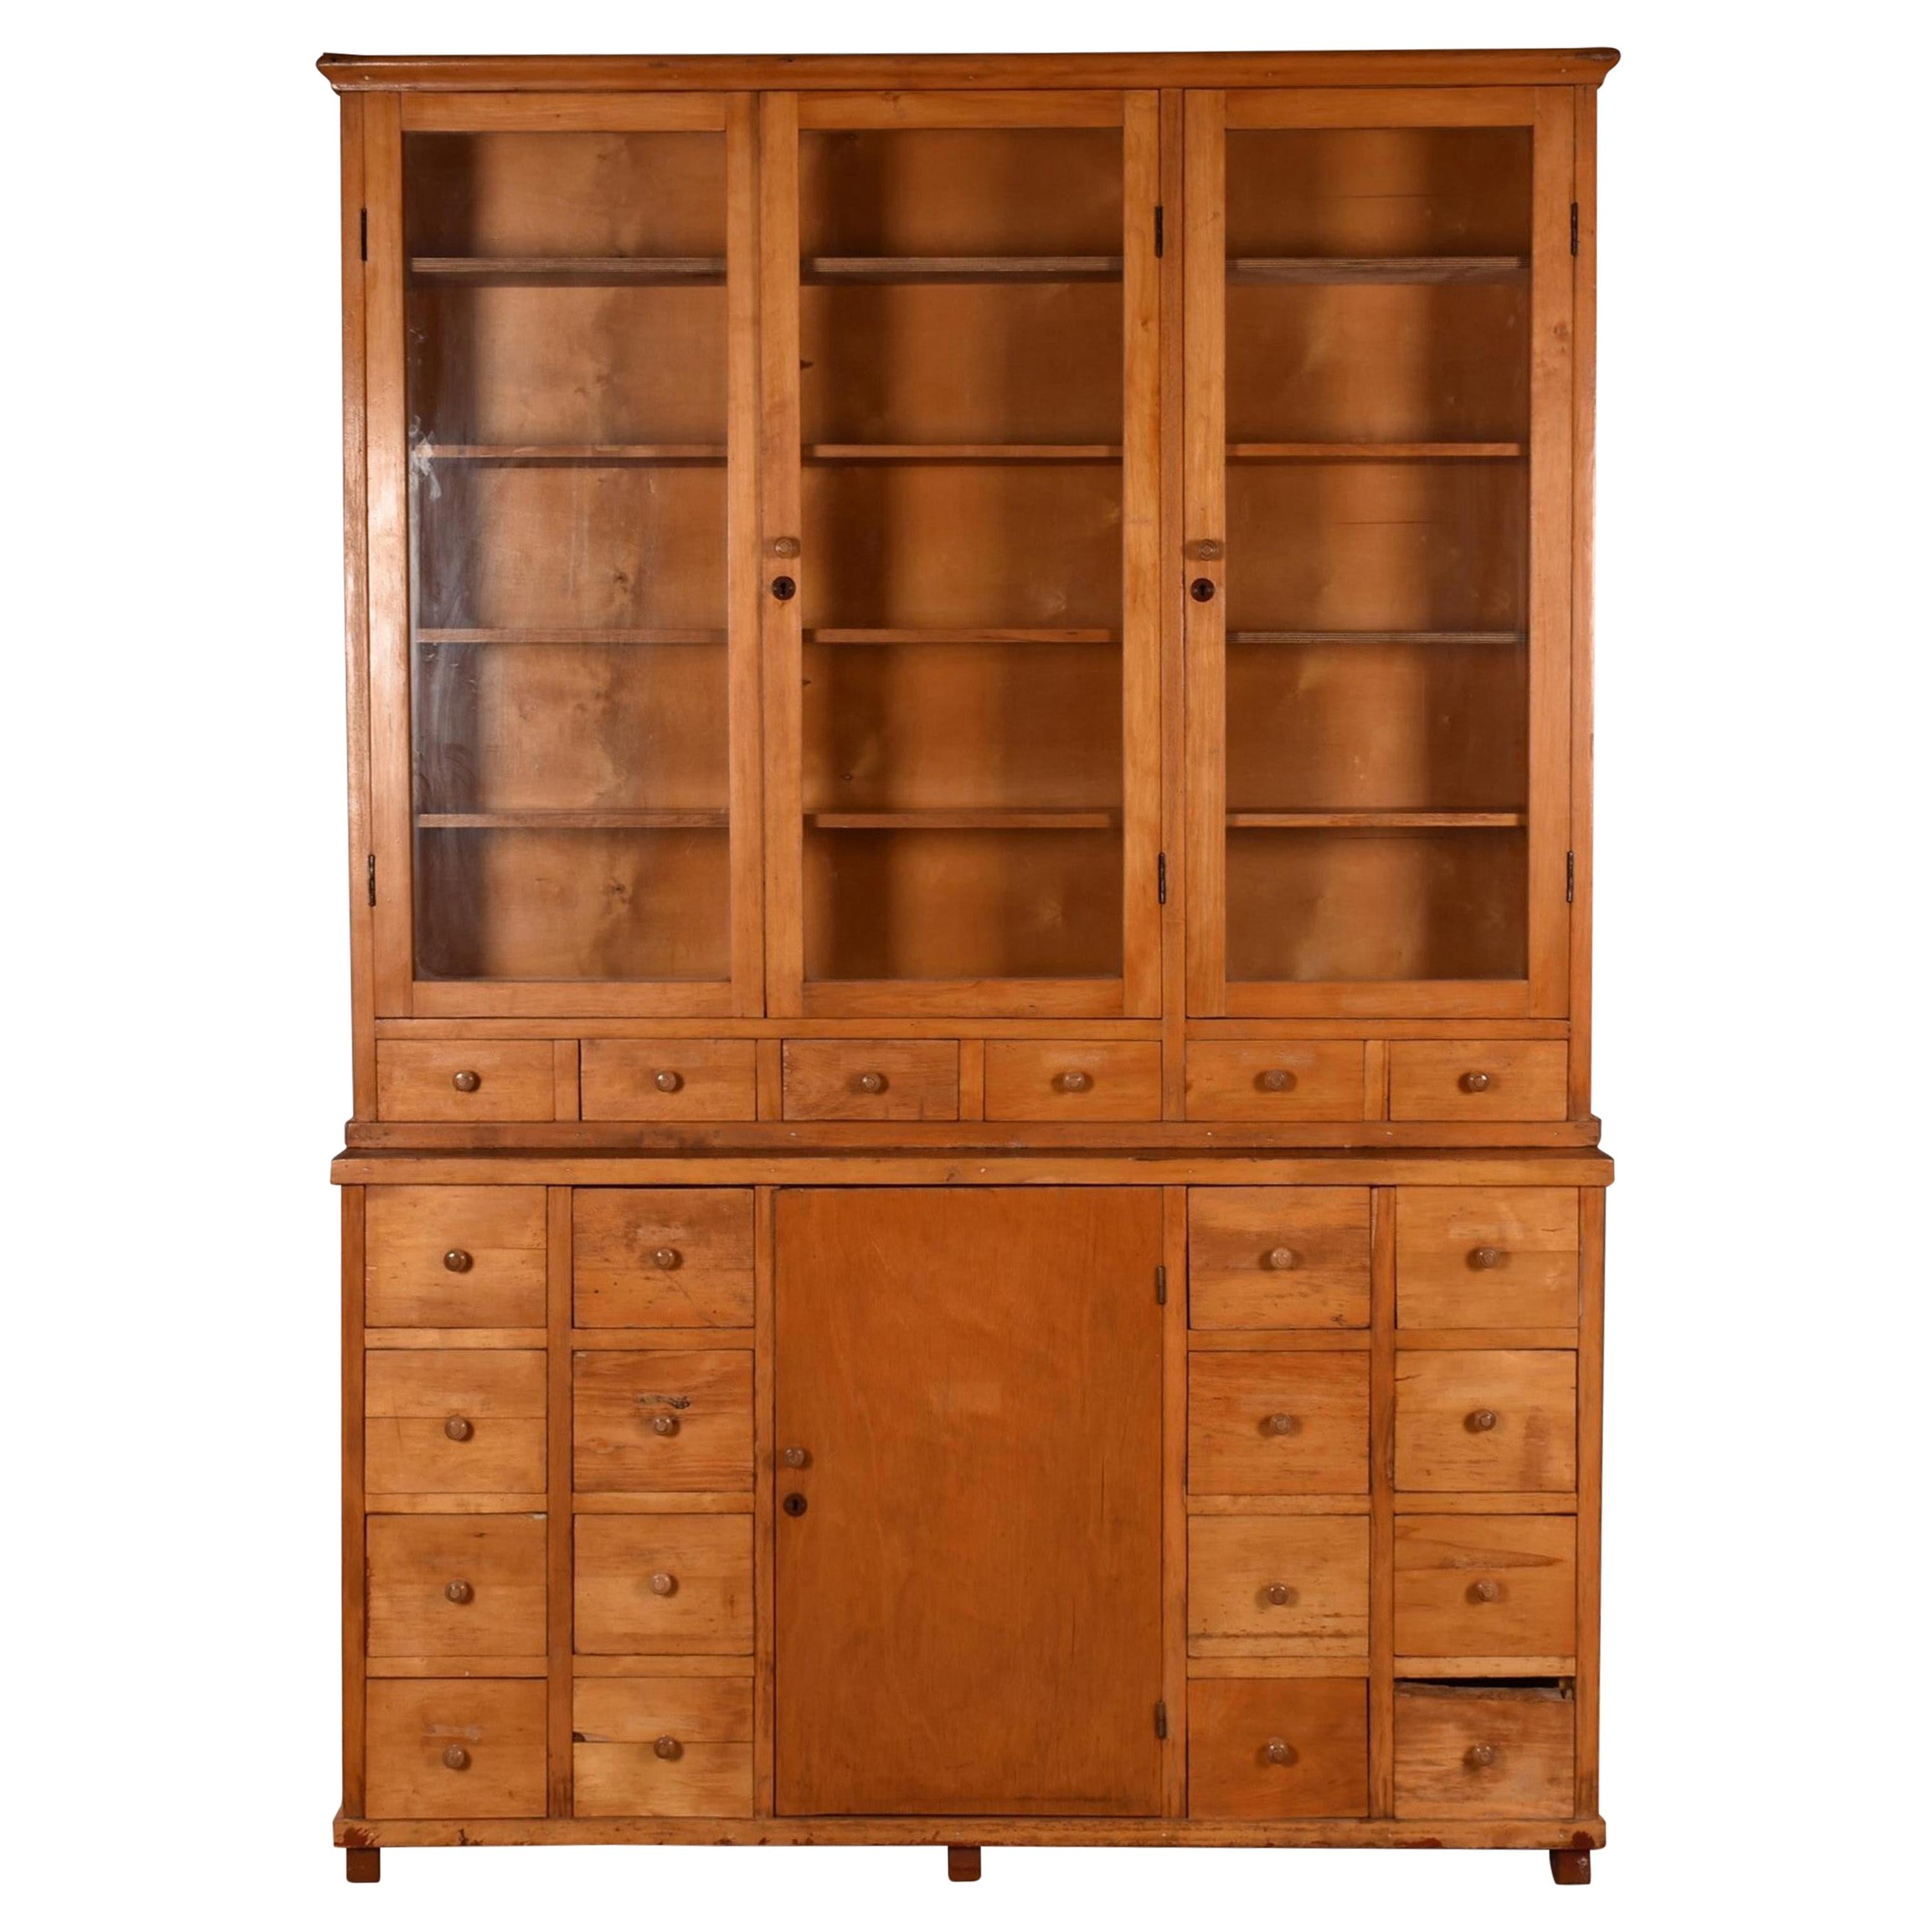 Apothecary haberdashery display cabinet circa 1930s number 10

Apothecary / pharmacy / chemist / shop display / restaurant cabinet, circa 1930s

Apothecary pharmacy beech display cabinet dating to circa 1930s, This piece is one of seven similar